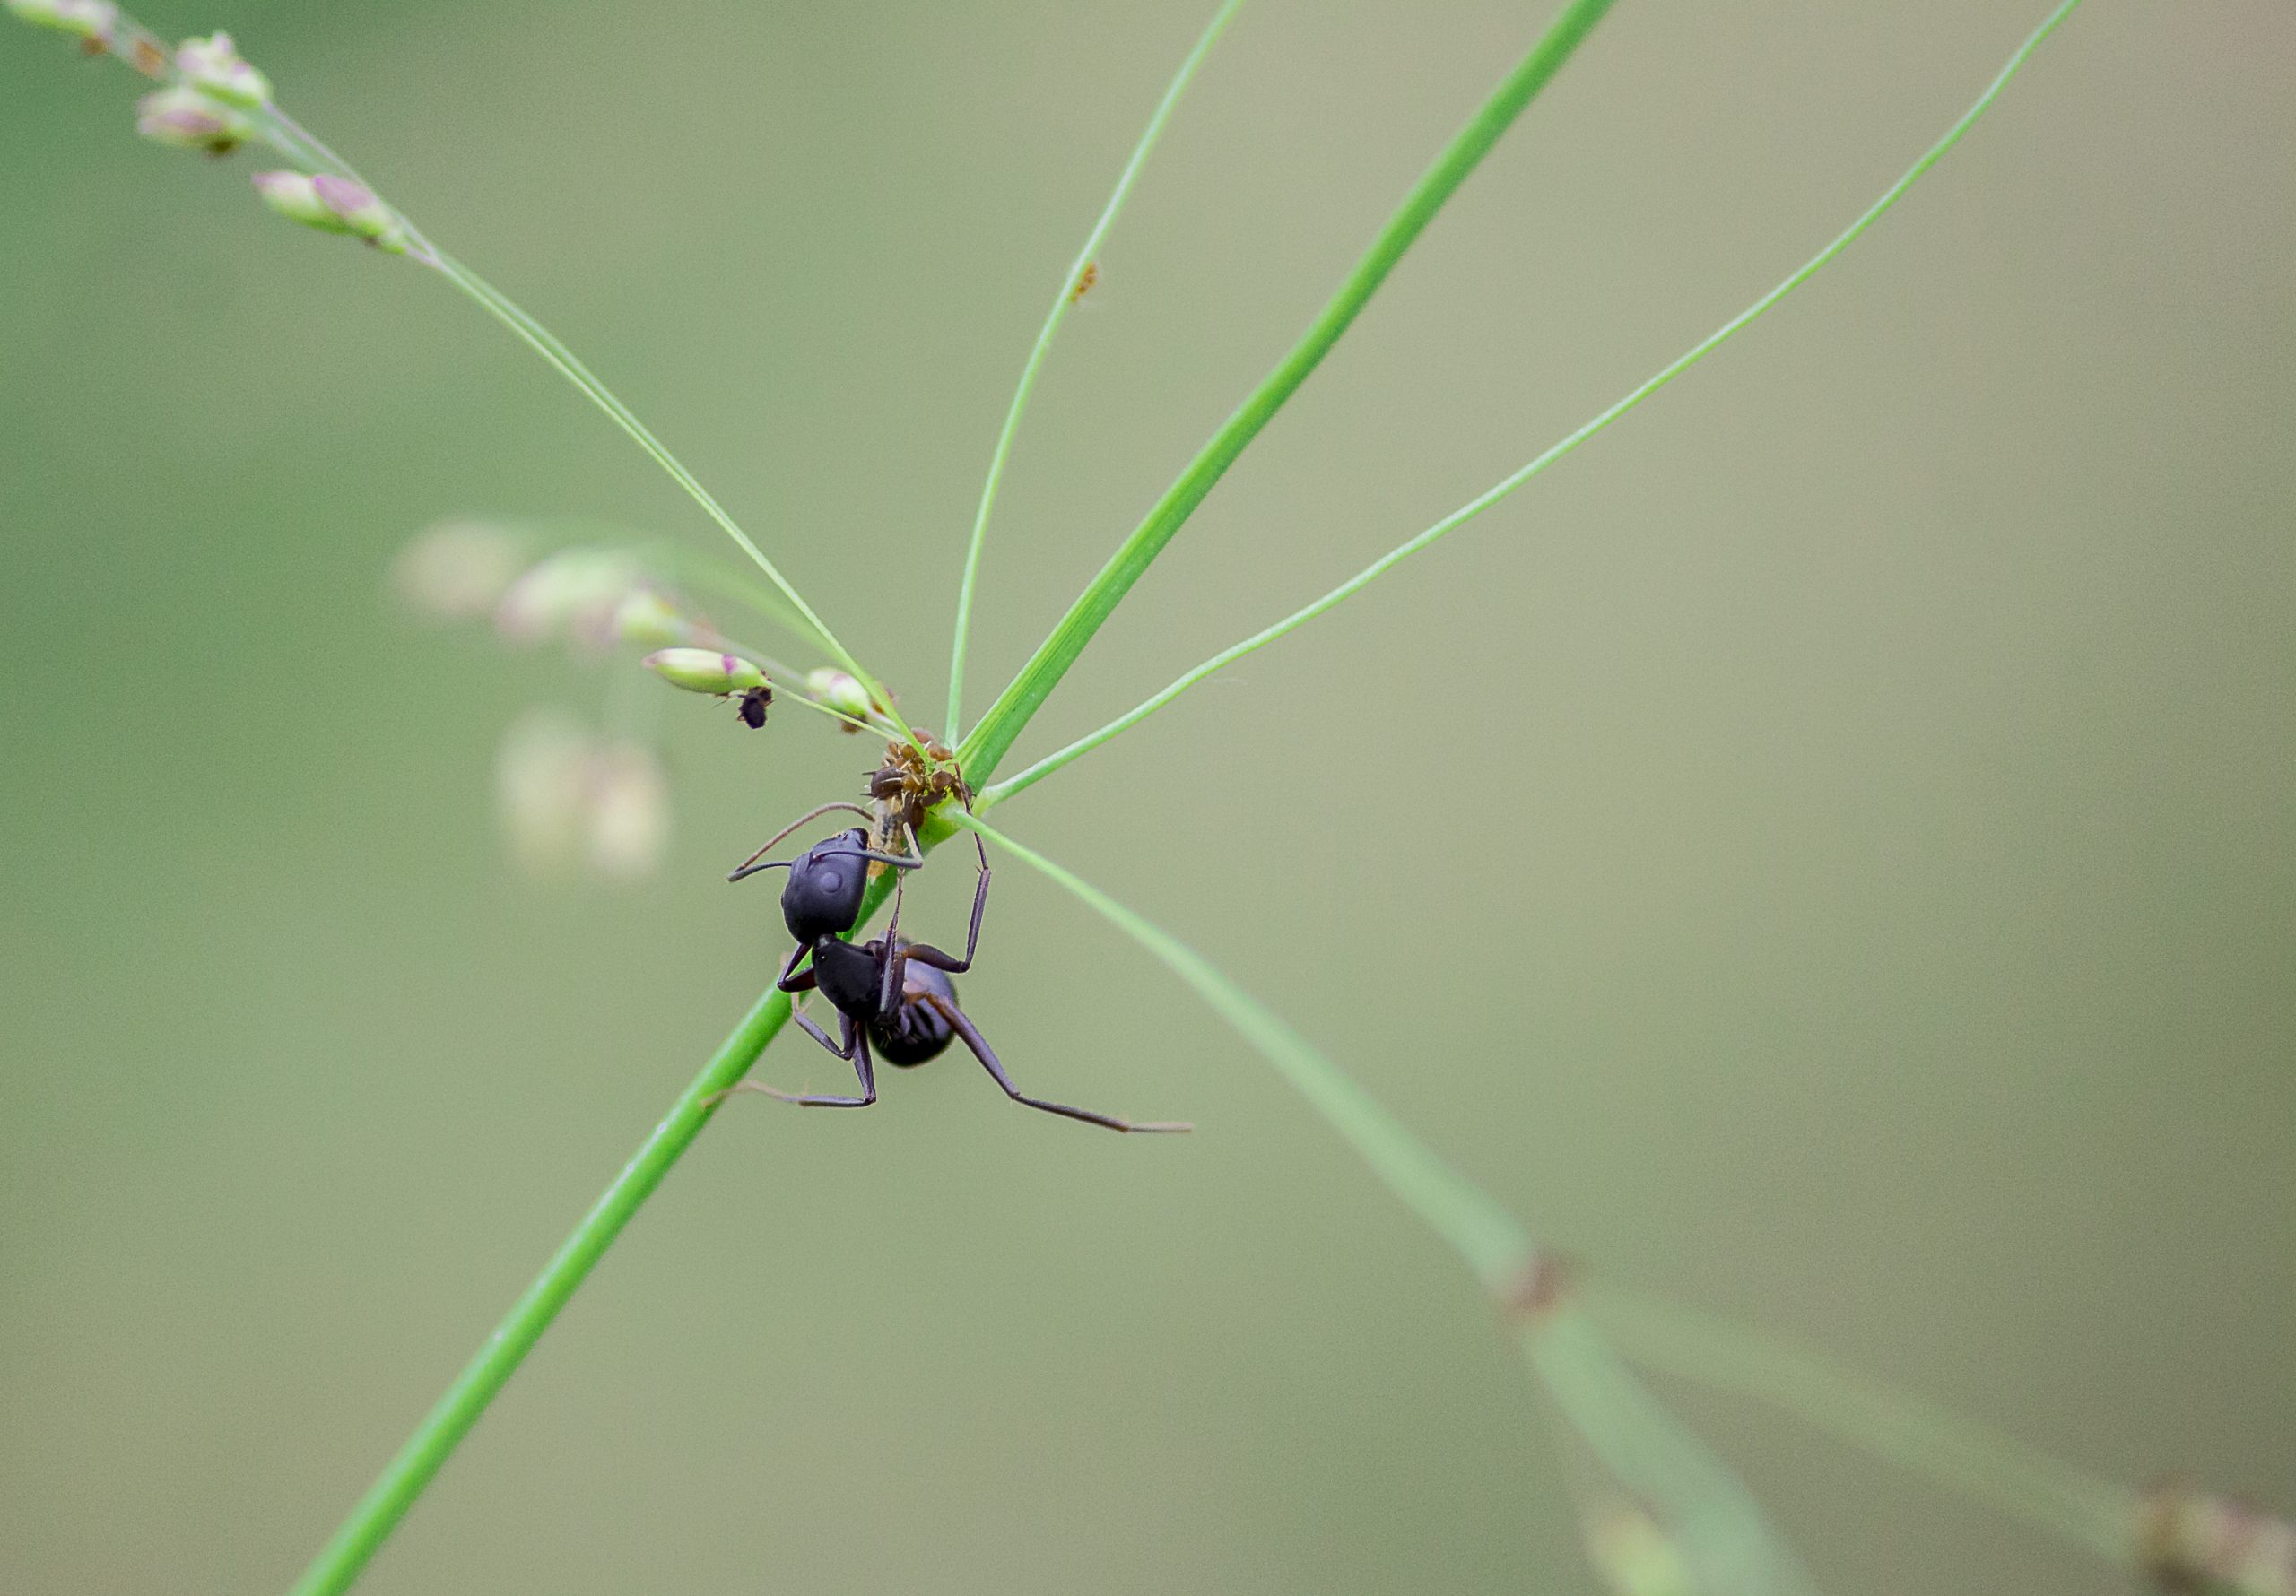 A black ant sitting on a plant